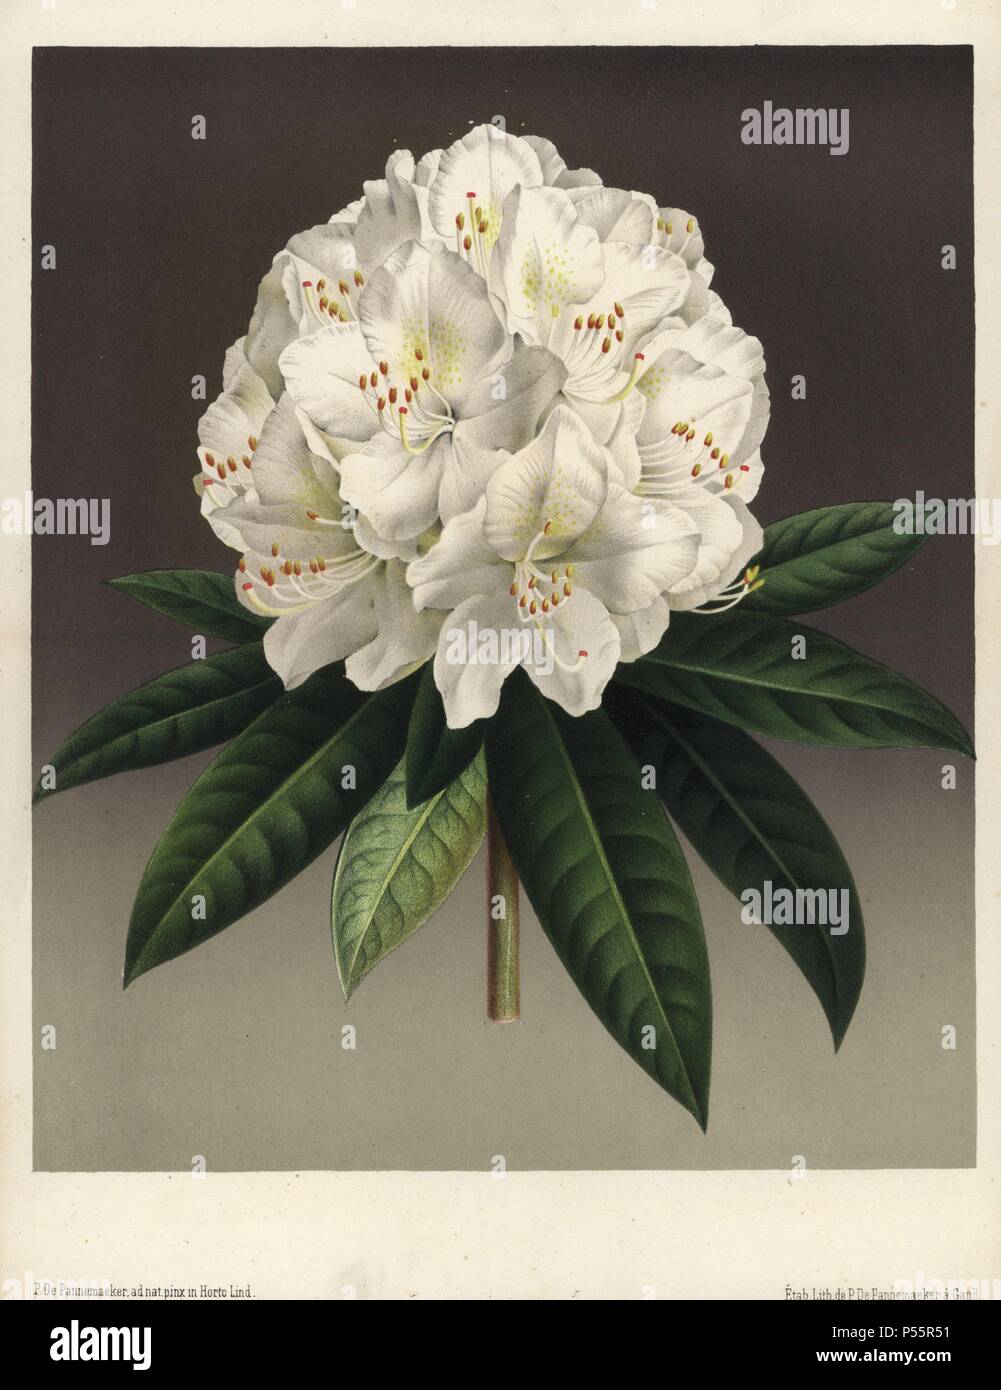 Large creamy white flowered rhododendron against a dark background. Rhododendron Princess Louise. Chromolithograph drawn and lithographed by P. de Pannemaeker, for Jean Linden's 'L'Illustration Horticole' published in Ghent in 1886. Jean Linden (1817-1898) was a Belgian explorer, horticulturist, scientist and publisher of botanical books. Stock Photo